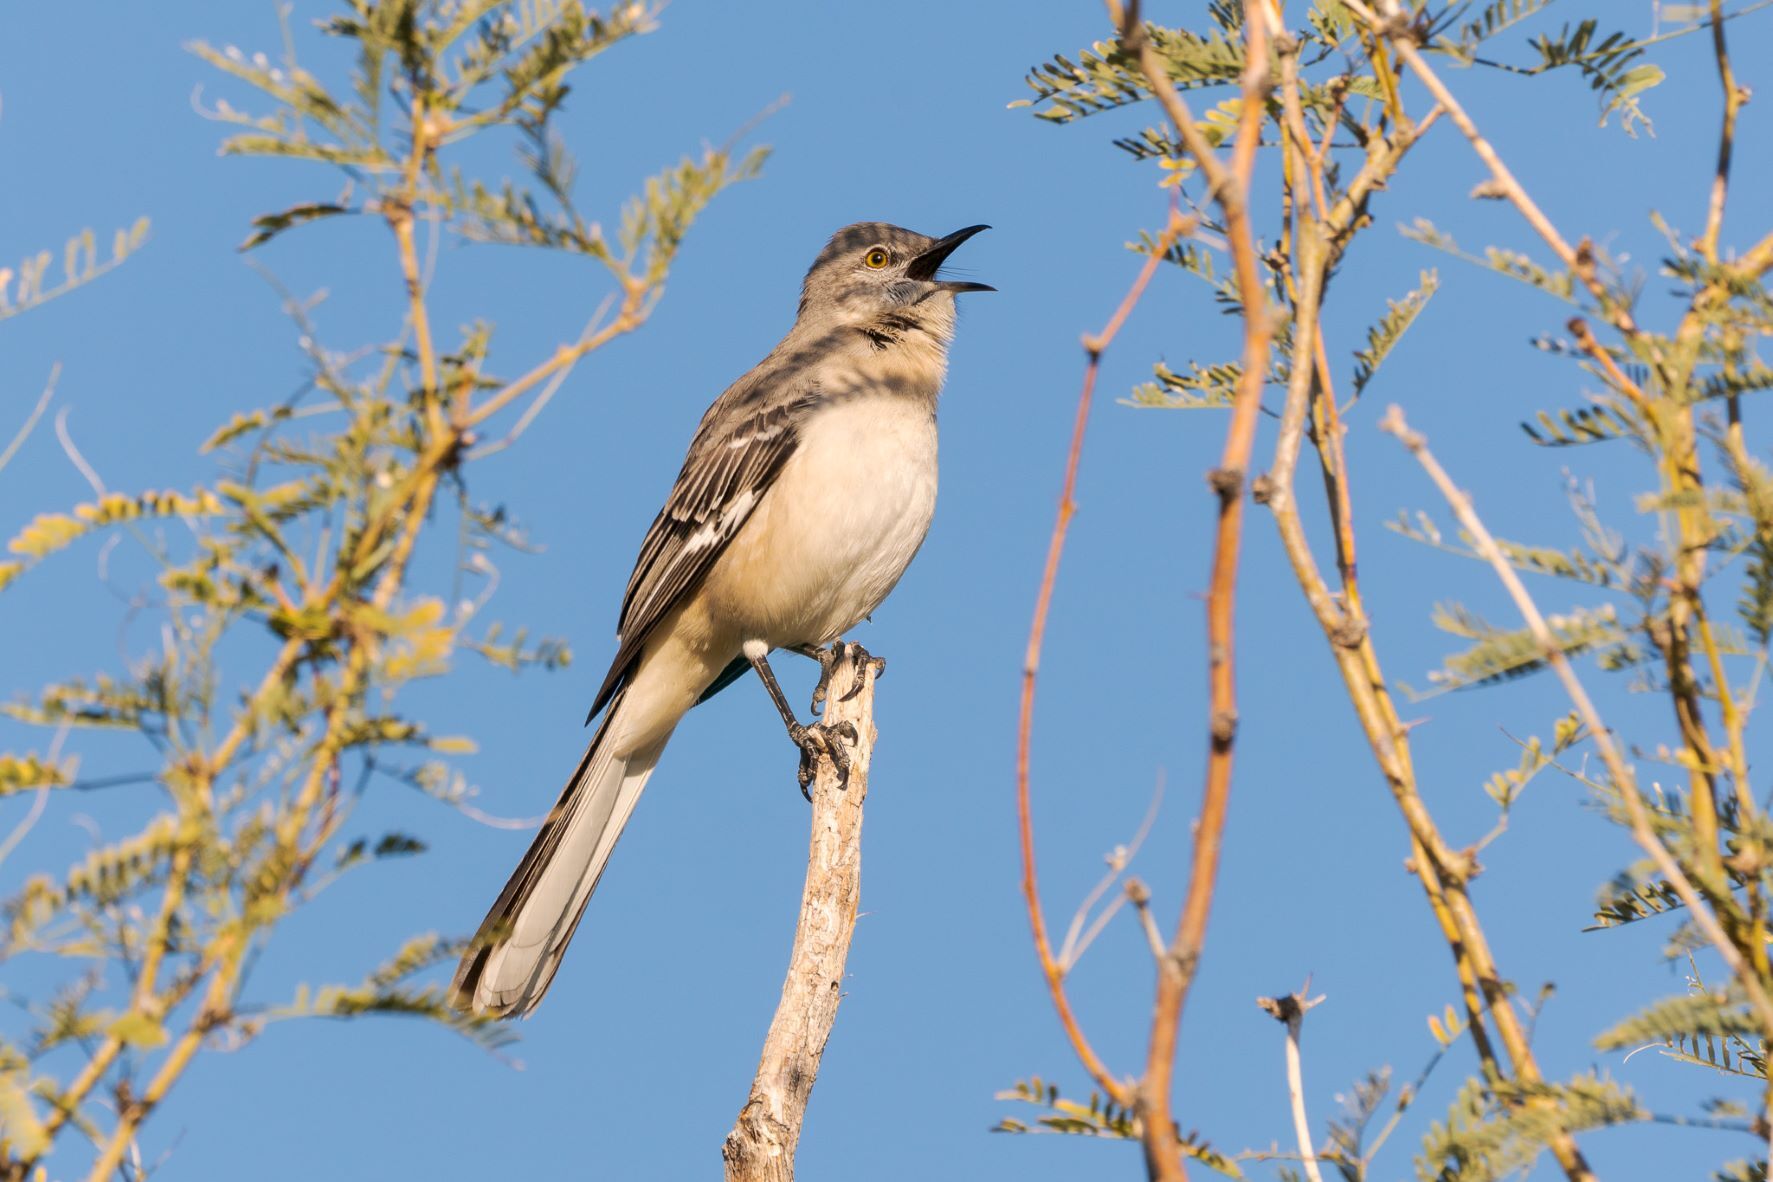 The male Northern Mockingbird can master a repertoire of over 100 songs. <a href="https://www.flickr.com/photos/themikebot/4829517096/" target="_blank">Photo</a>: Rick Cameron<a href="https://www.flickr.com/photos/rickcameron/45875743424/" target="_blank" >CC BY-NC-ND 2.0</a>